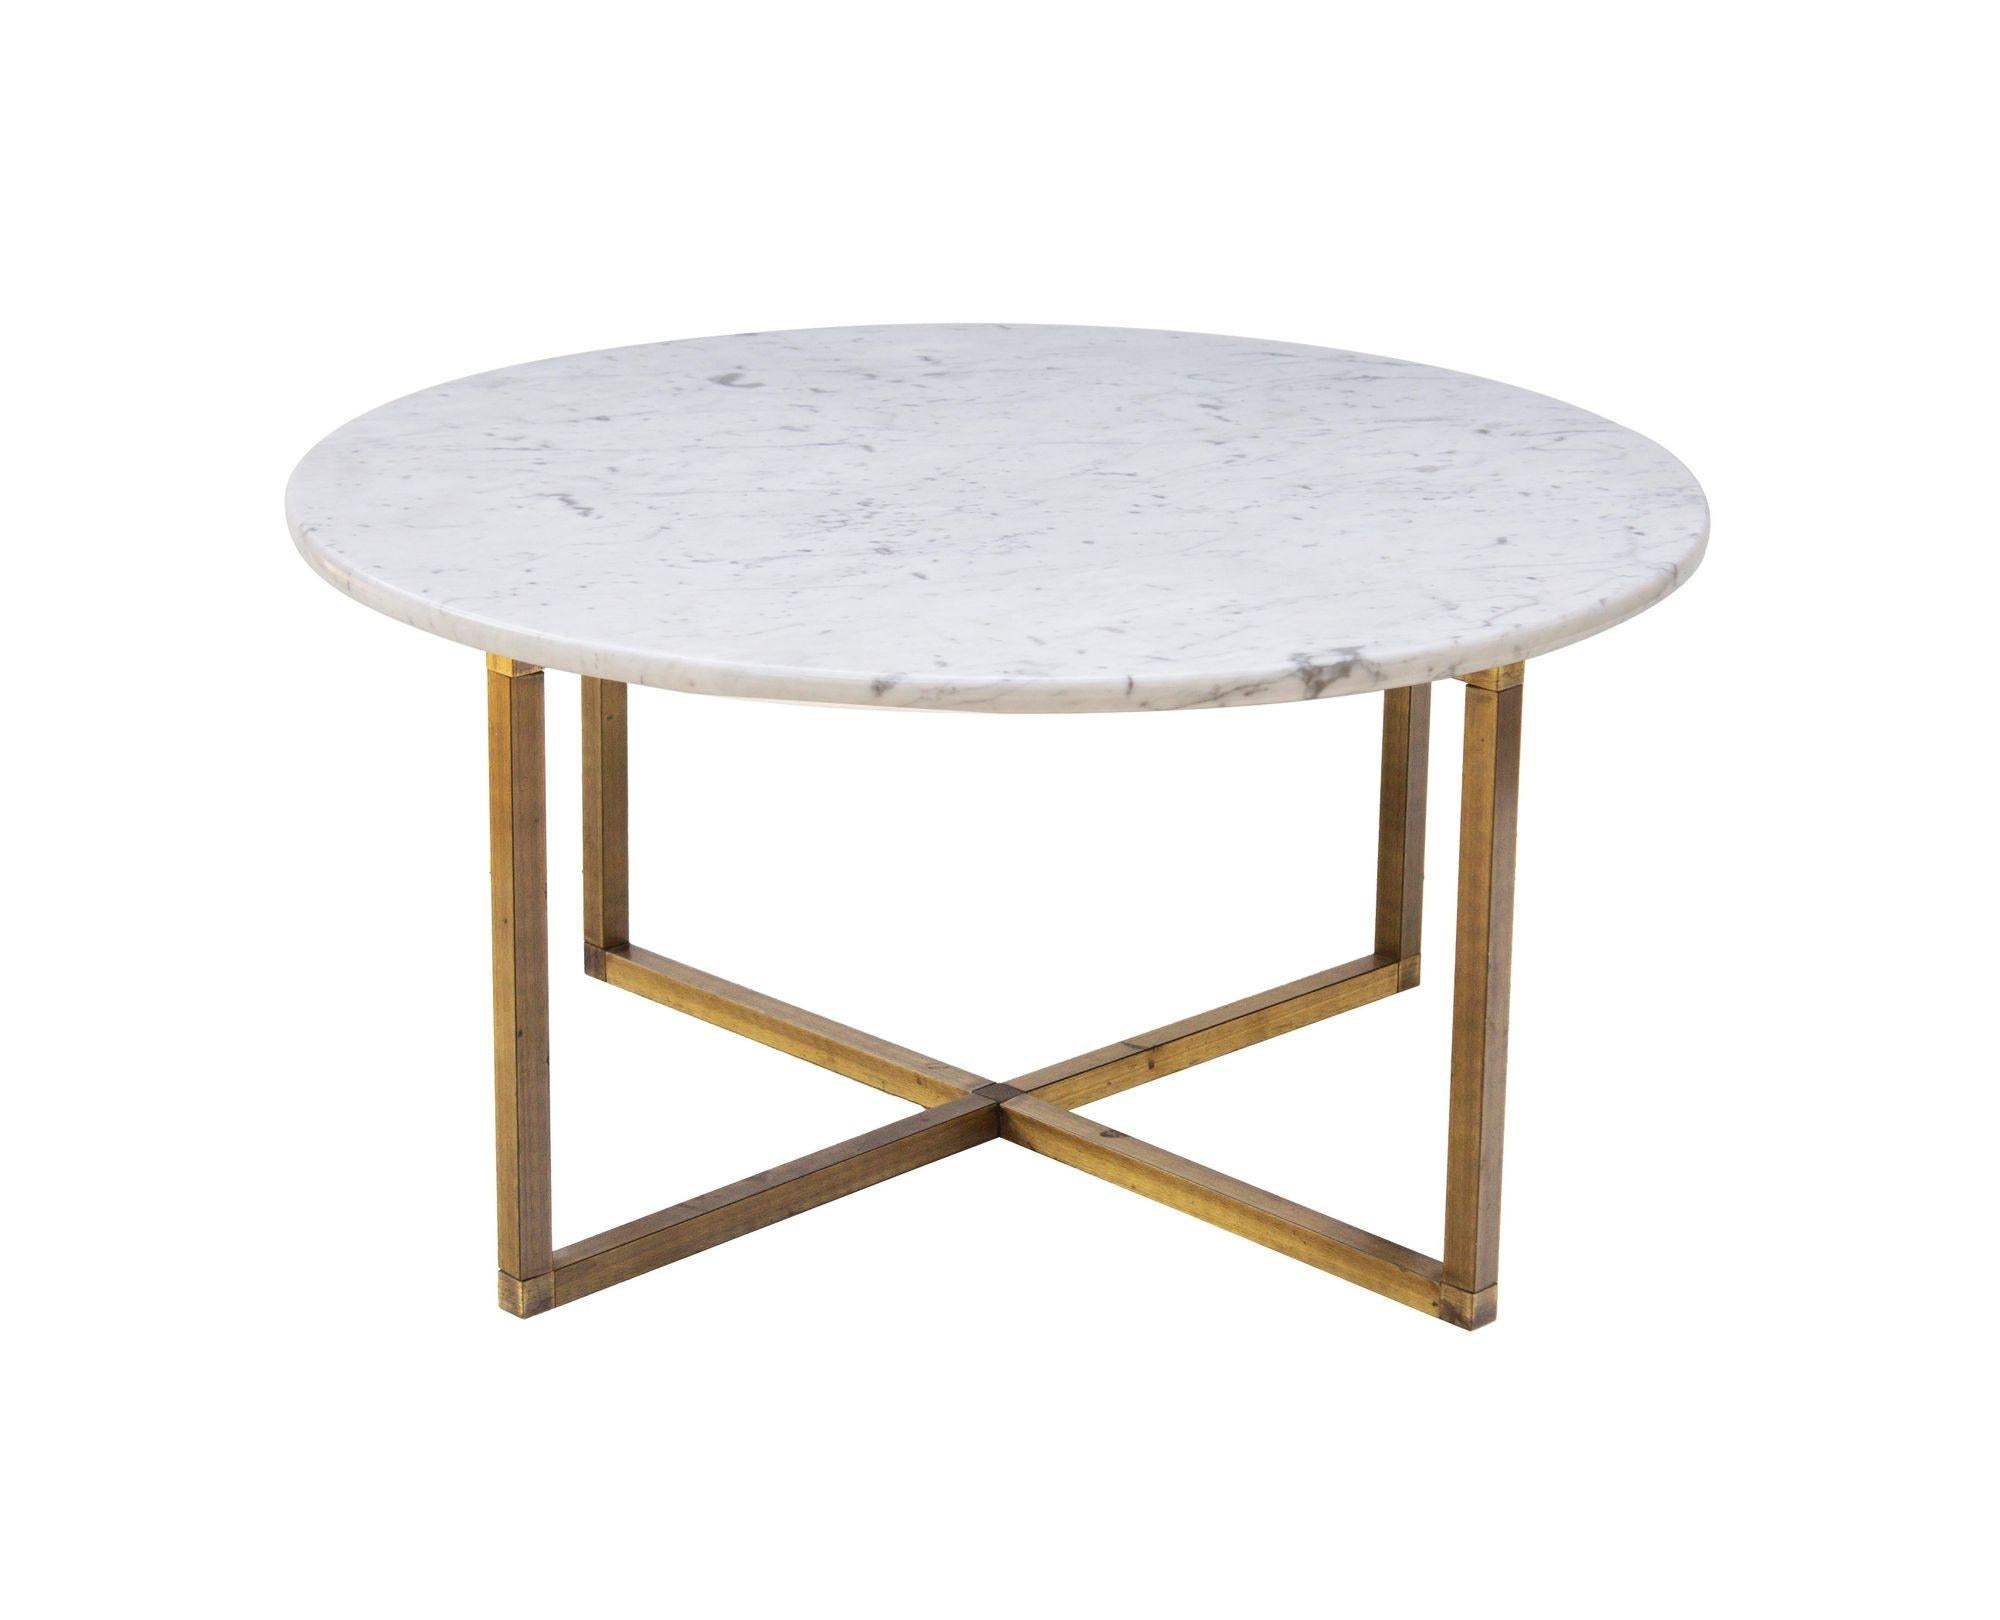 American Round Brass Coffee Table with x Base and Italian Marble Top For Sale